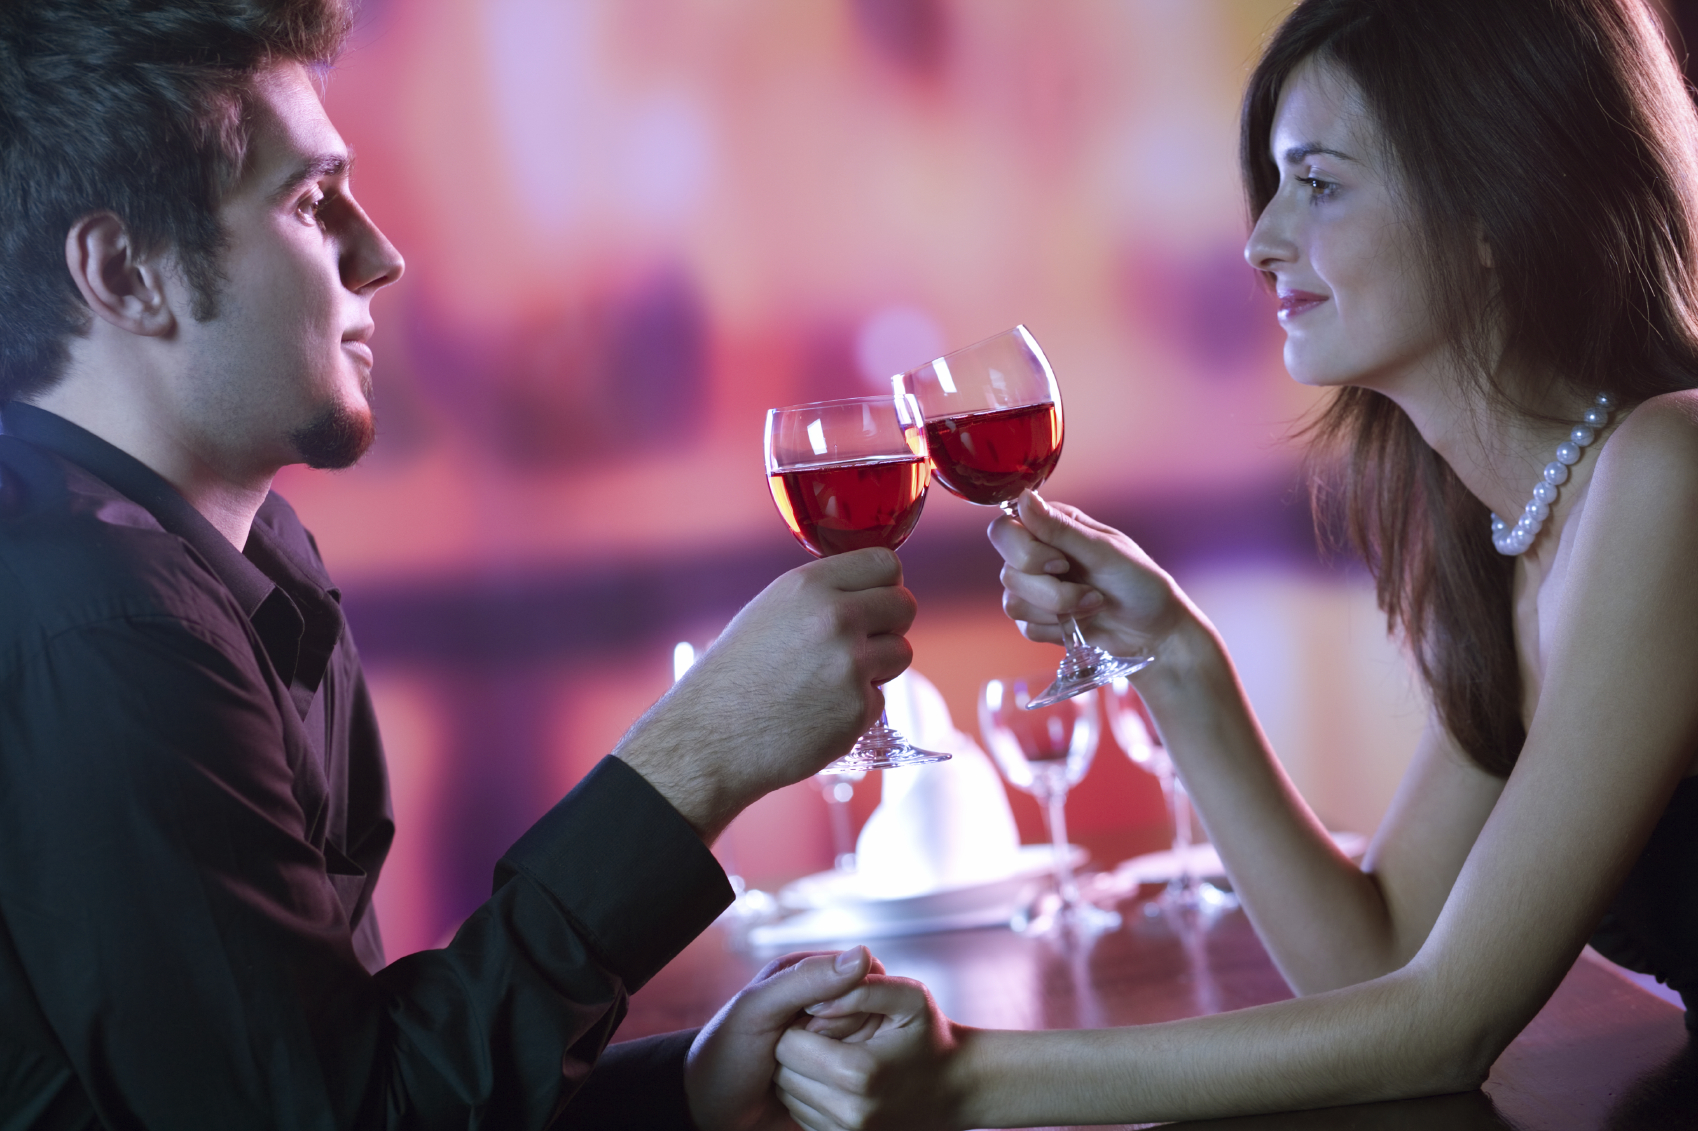 How To Hook Up On The First Date | HookupCloud.com